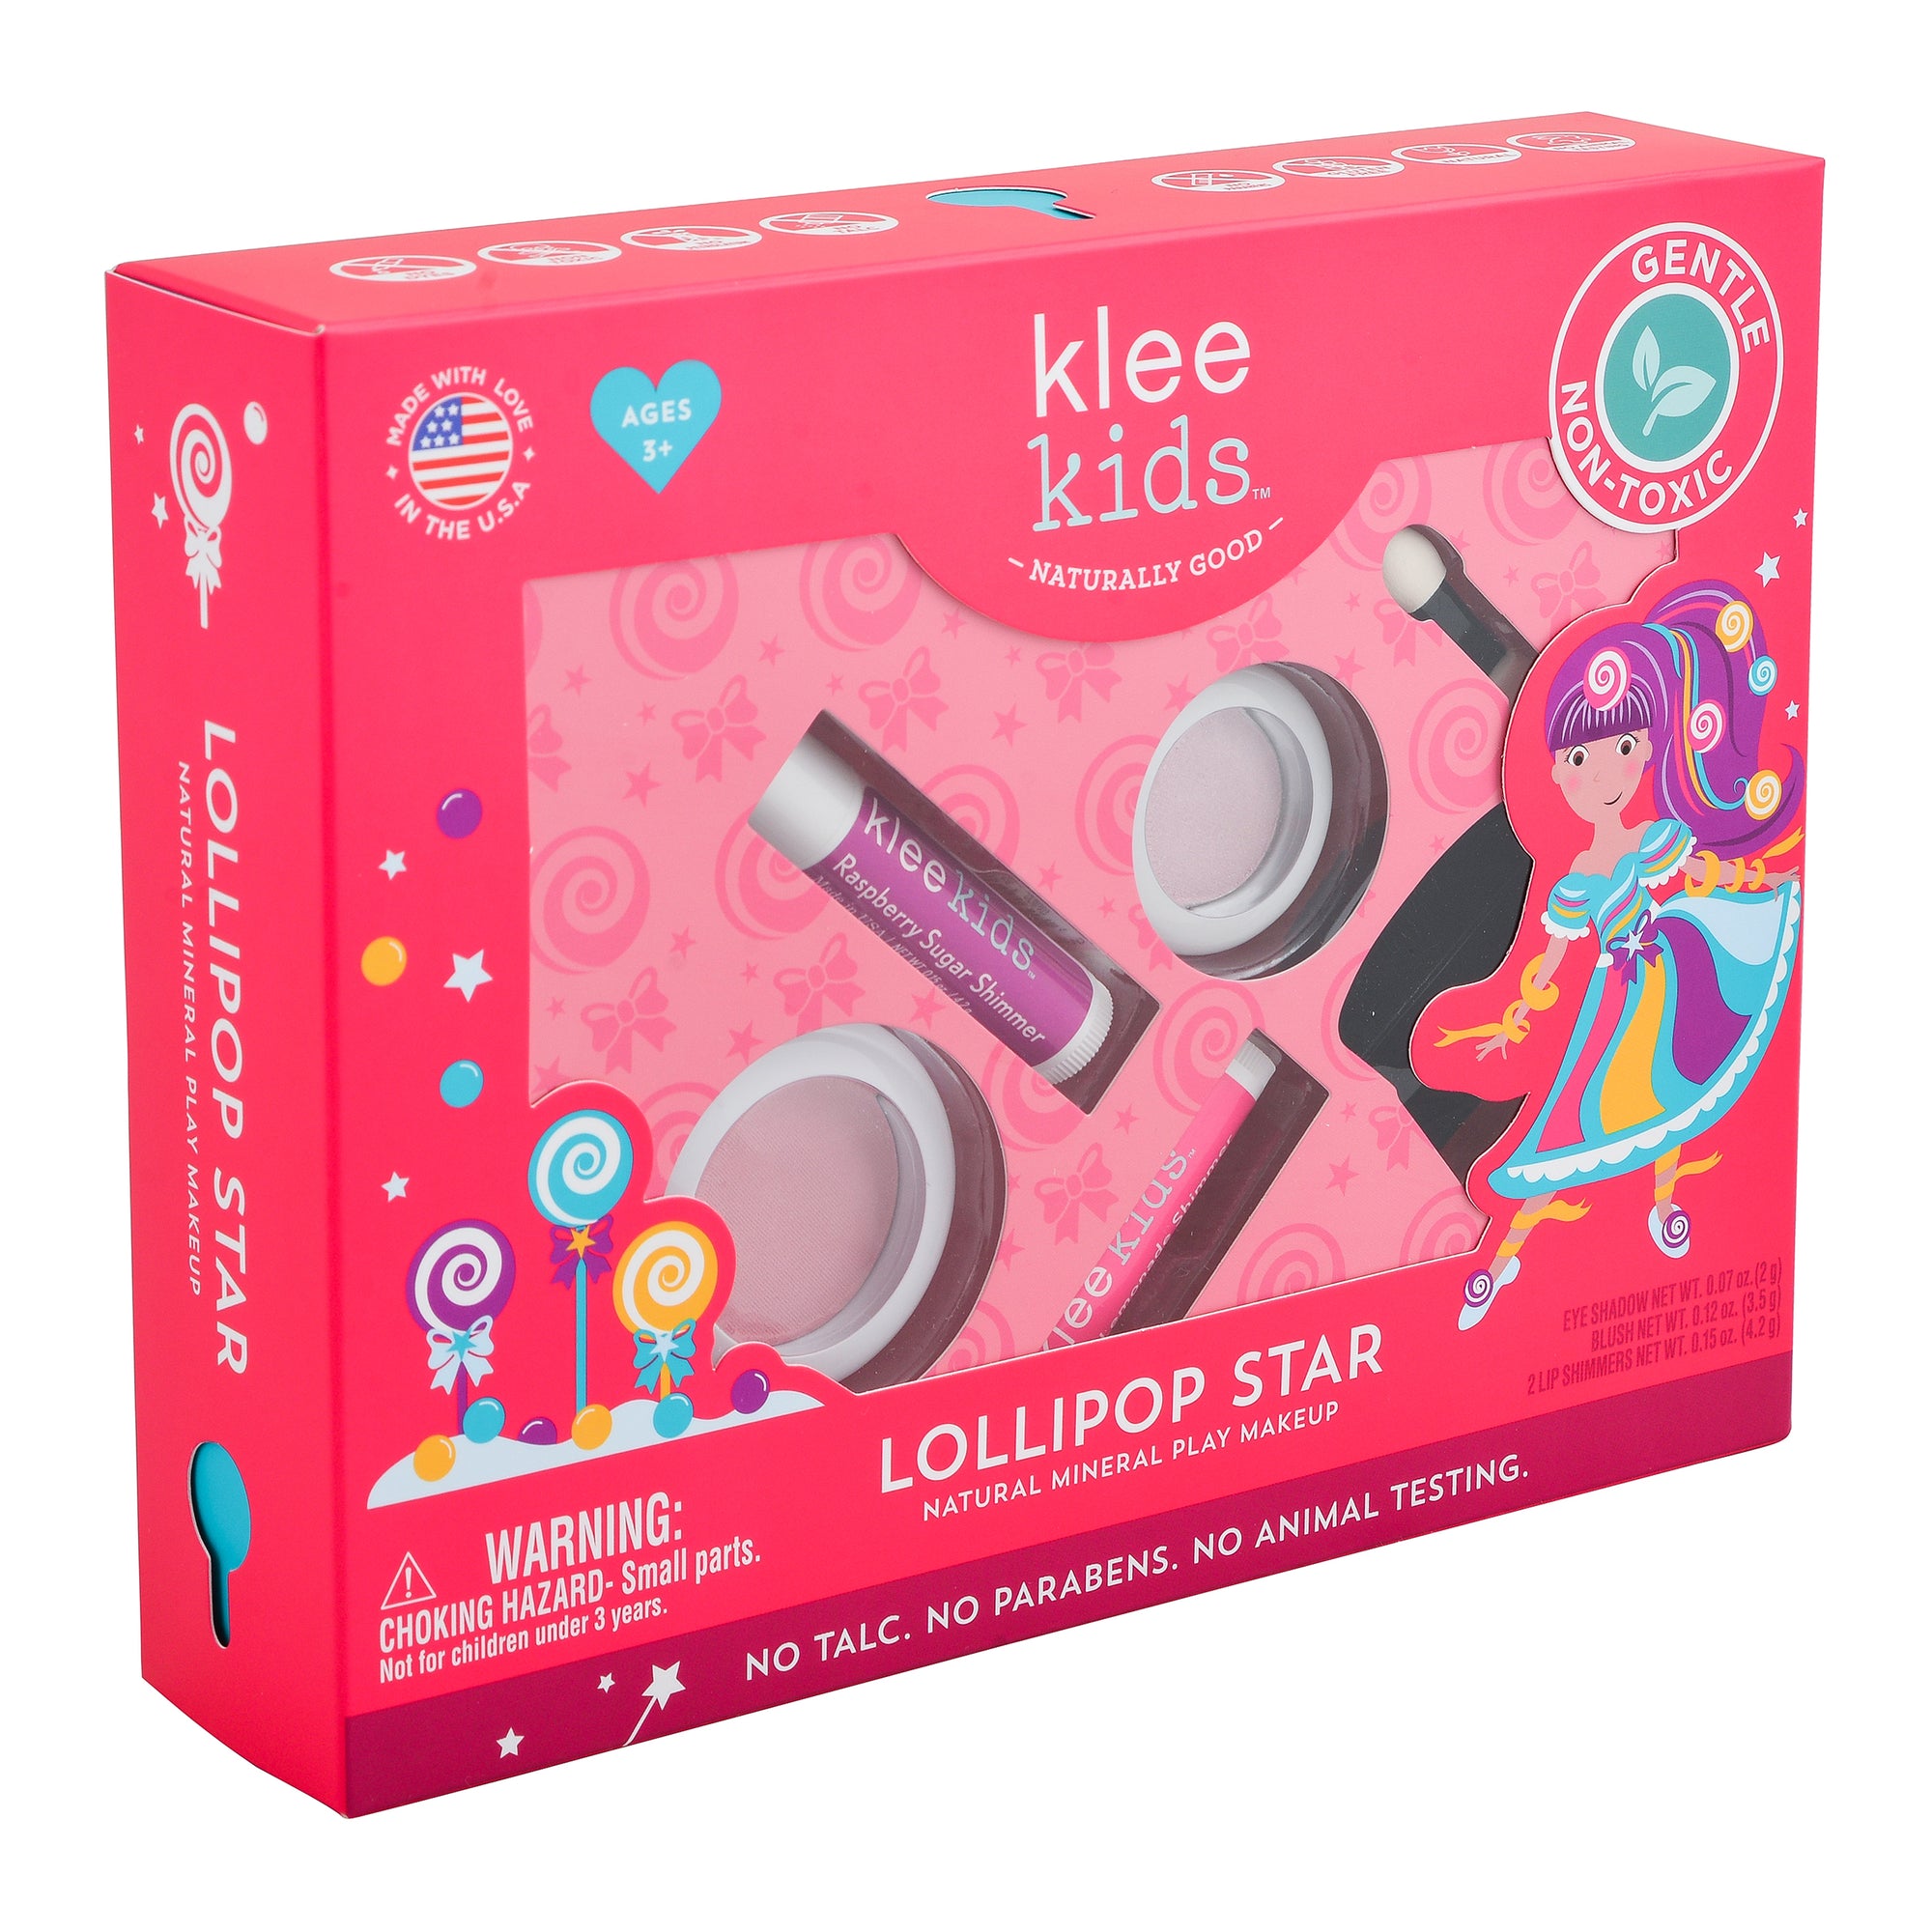 Play 2 Play Chocolate Lollipop Maker Novelty Kitchen Tool Set Teal/Pink  Ages 6+